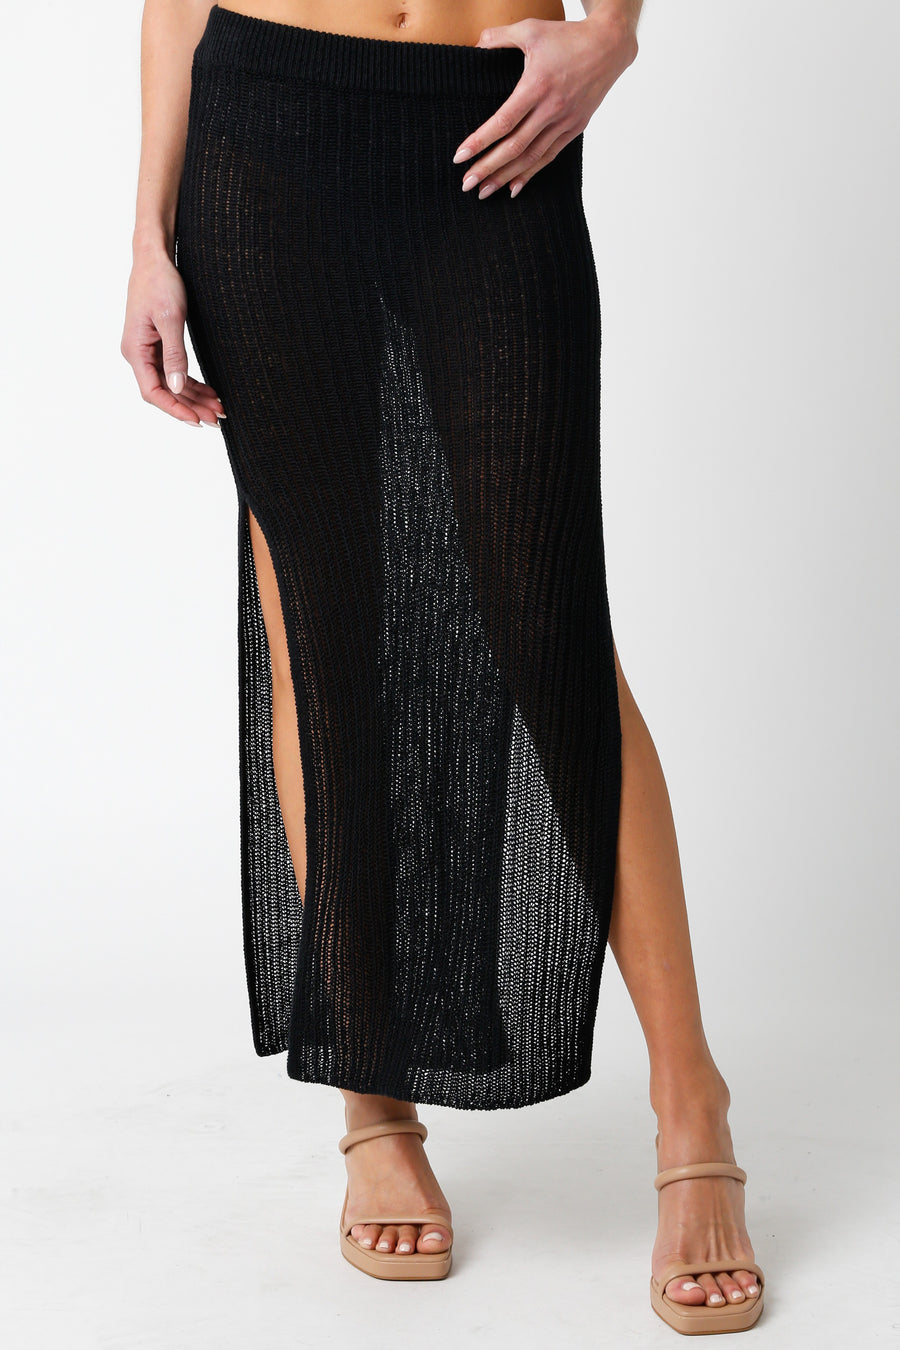 Featuring a wide knit midi skirt with slits on each side in the color black 